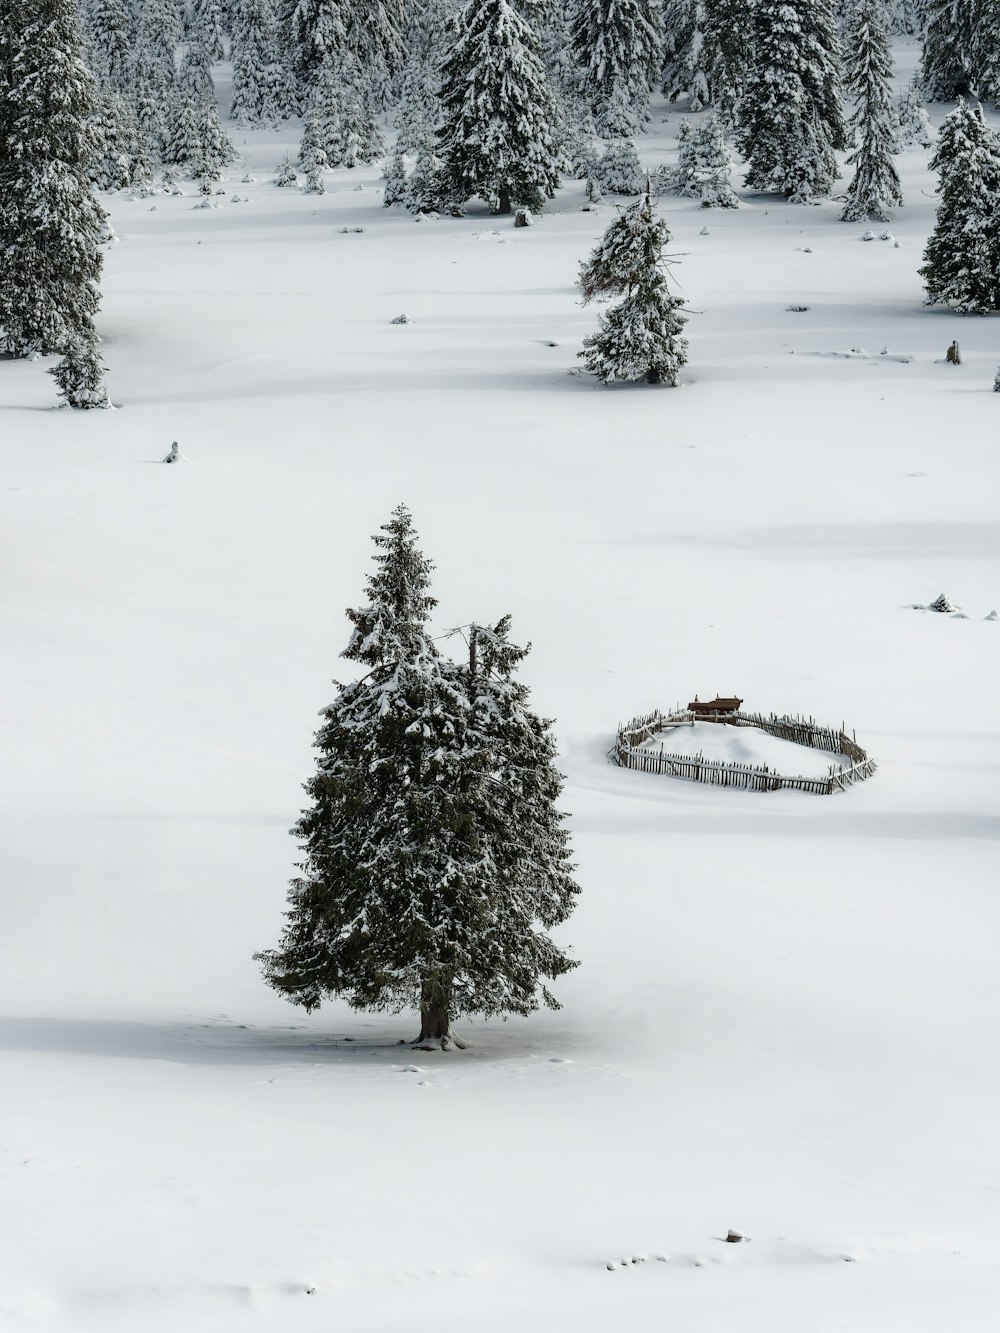 a snow covered field with trees and a circular object in the middle